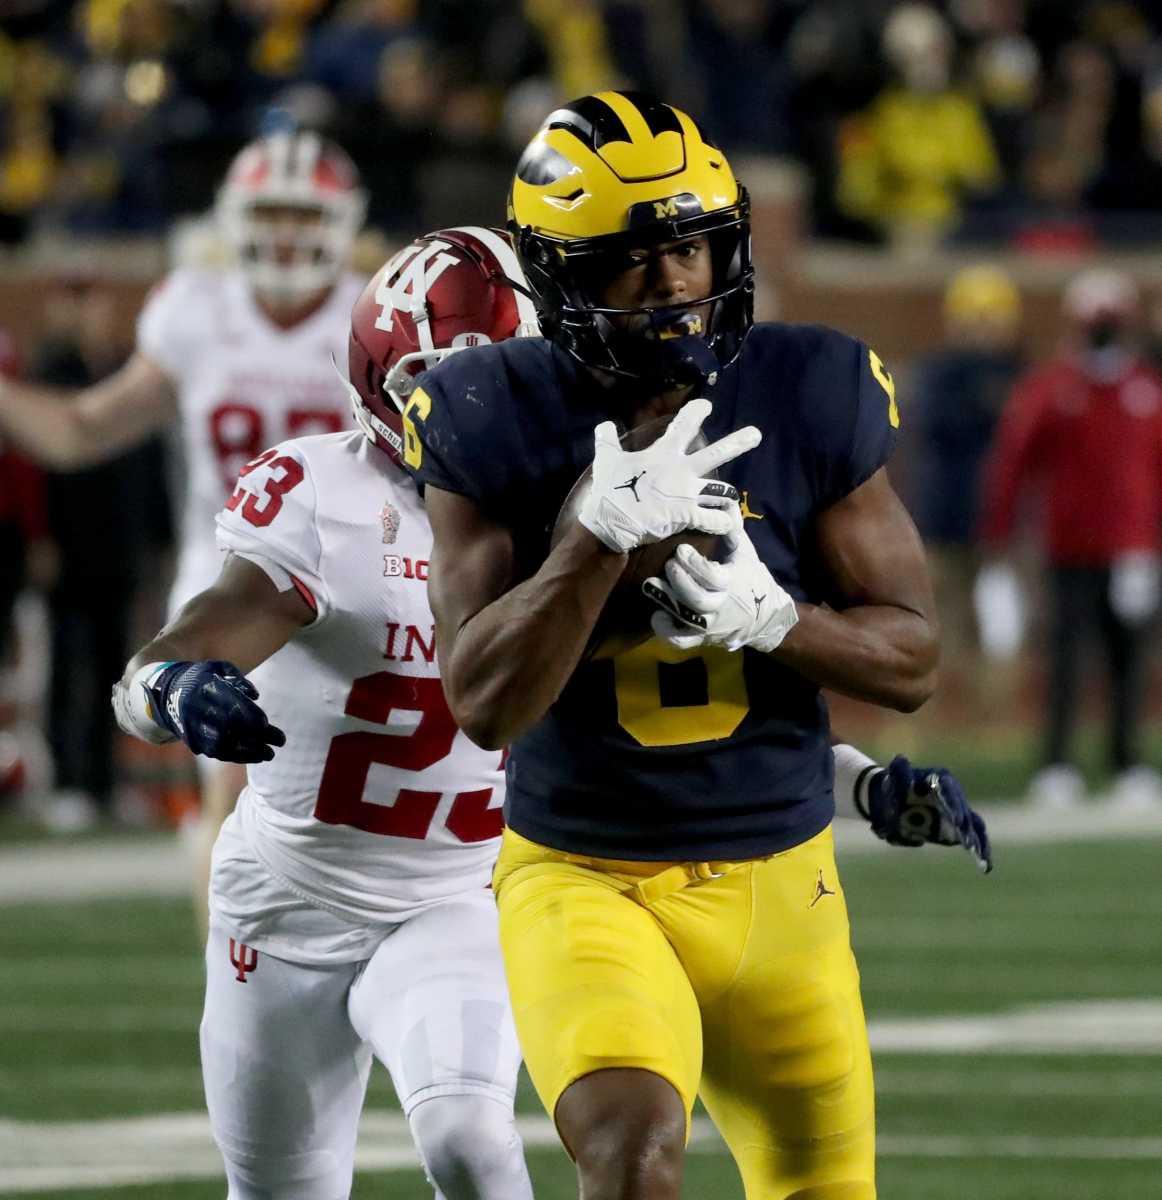 Michigan wide receiver Cornelius Johnson makes a catch against Indiana defensive back Jaylin Williams during the second half of Michigan's 29-7 win on Saturday, Nov. 6, 2021, at Michigan Stadium.